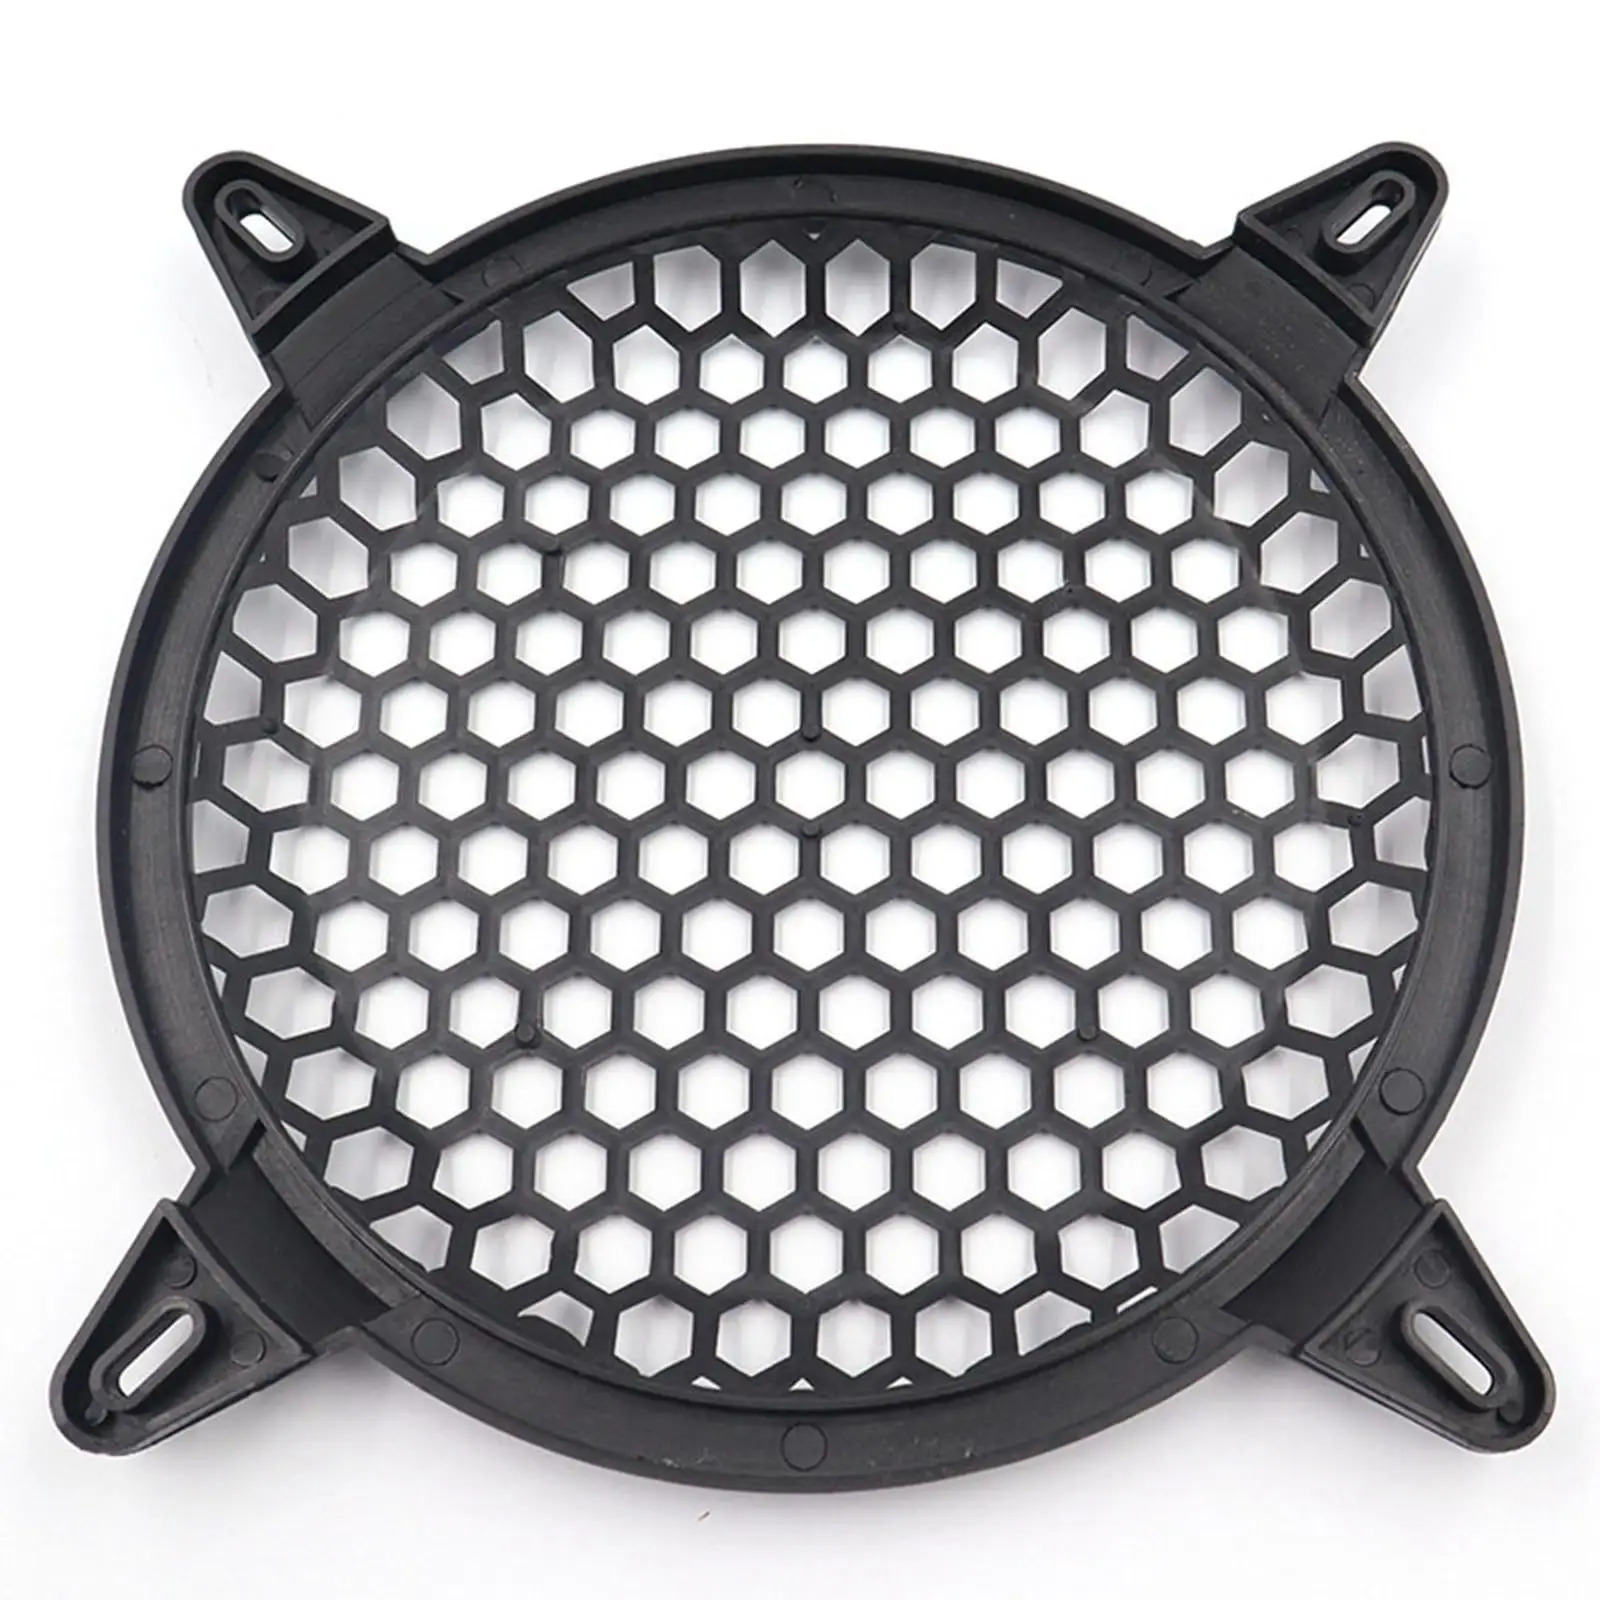 4x 8 Inch Speaker Covers Grills Decorative Circle Guard  Net Cover for Car Speaker Accessories Waffle Speaker Covers